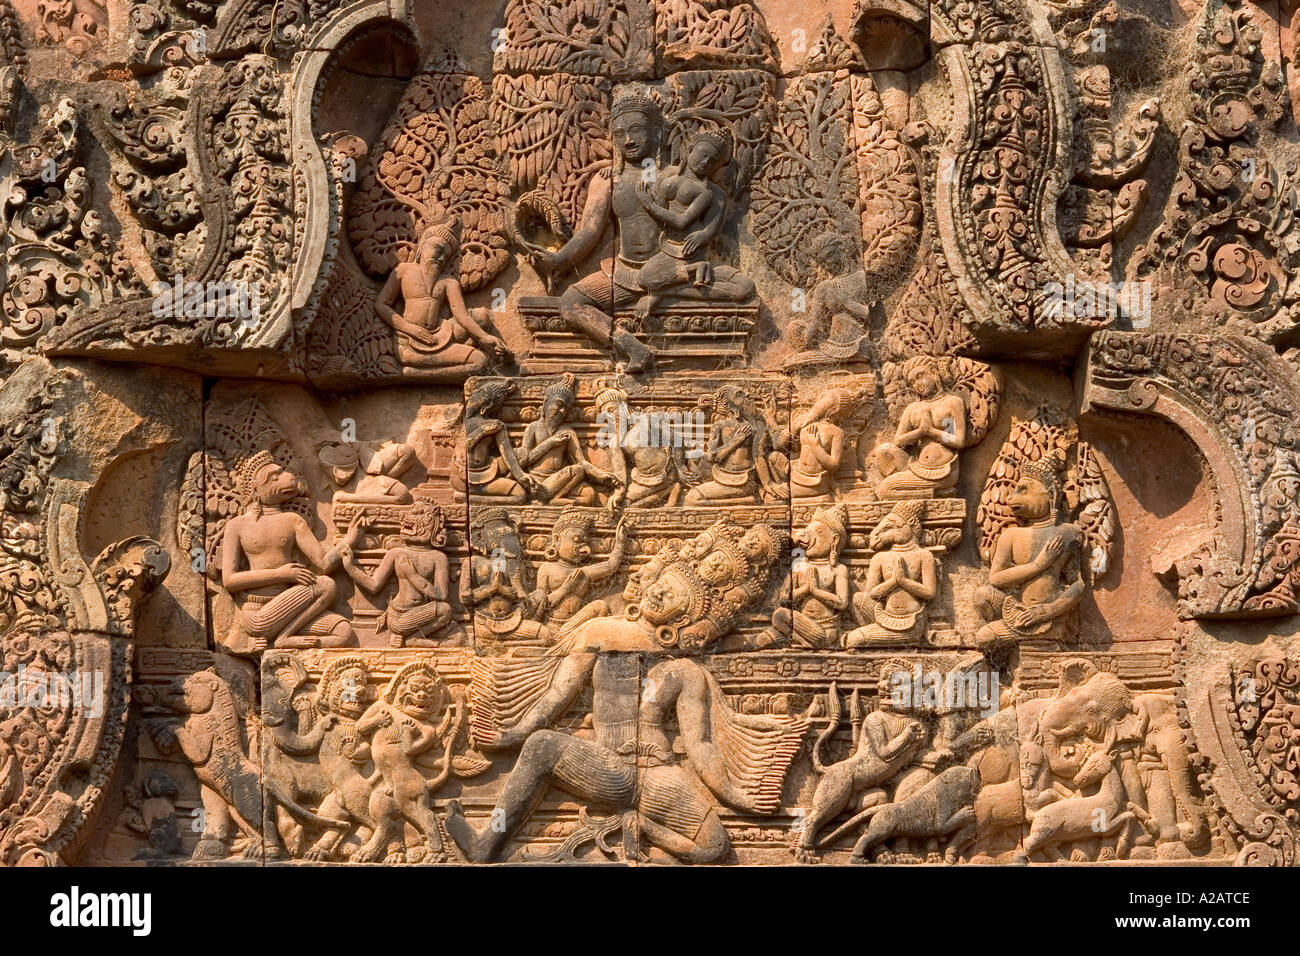 Cambodia Siem Reap Angkor Temples Banteay Srei Hindu Temple dedicated to Shiva Central citadel detail of carved lintel Stock Photo